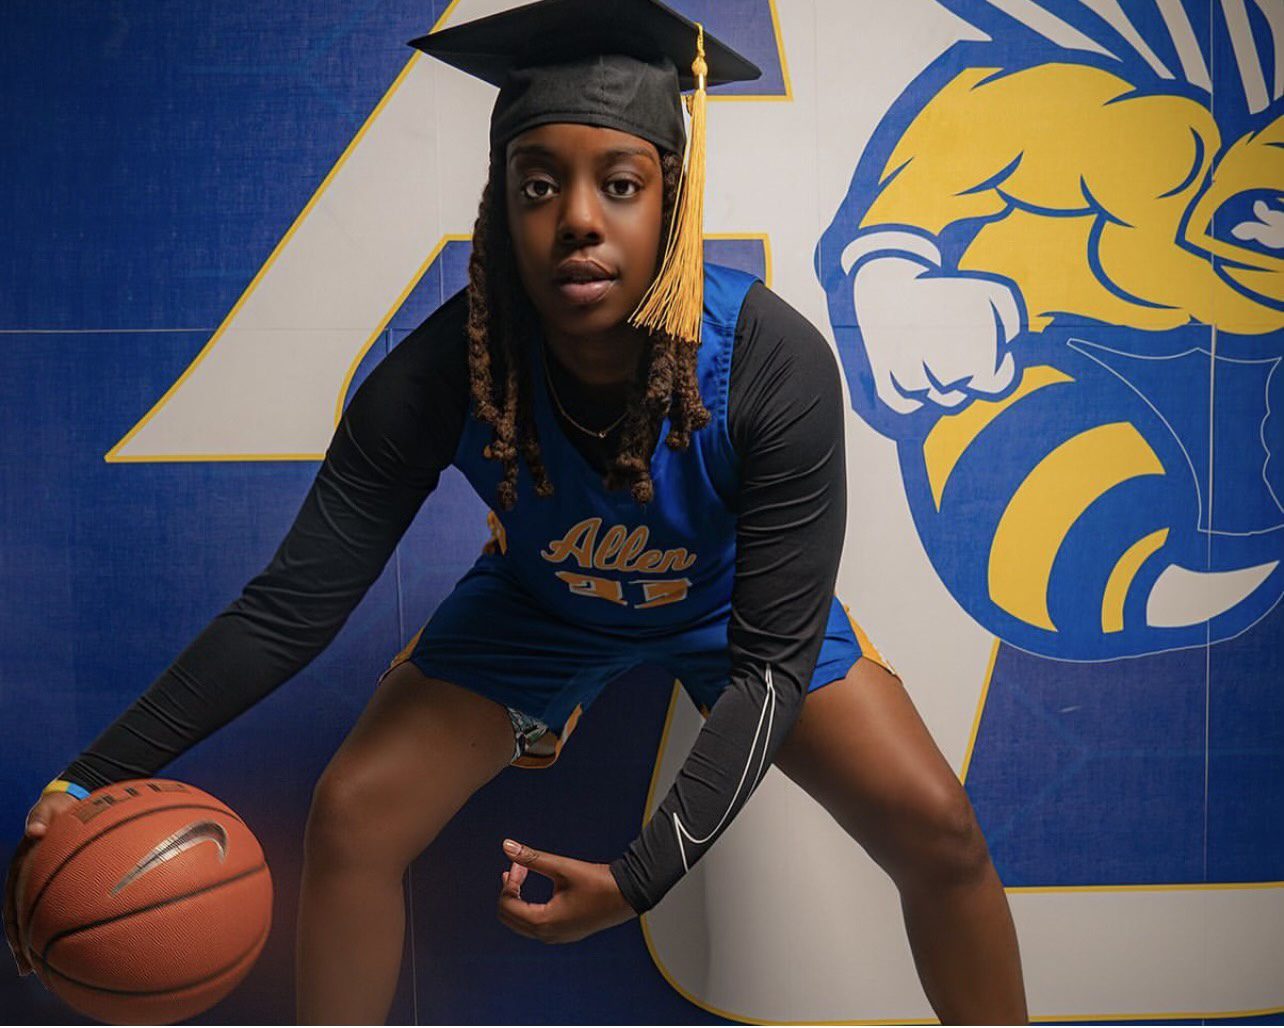 Benton is crouching and dribbling a basketball in front of a wall decal with the Allen University mascot and colors. She wears her Allen University basketball uniform and has a graduation cap on top of her shoulder-length brown locs.